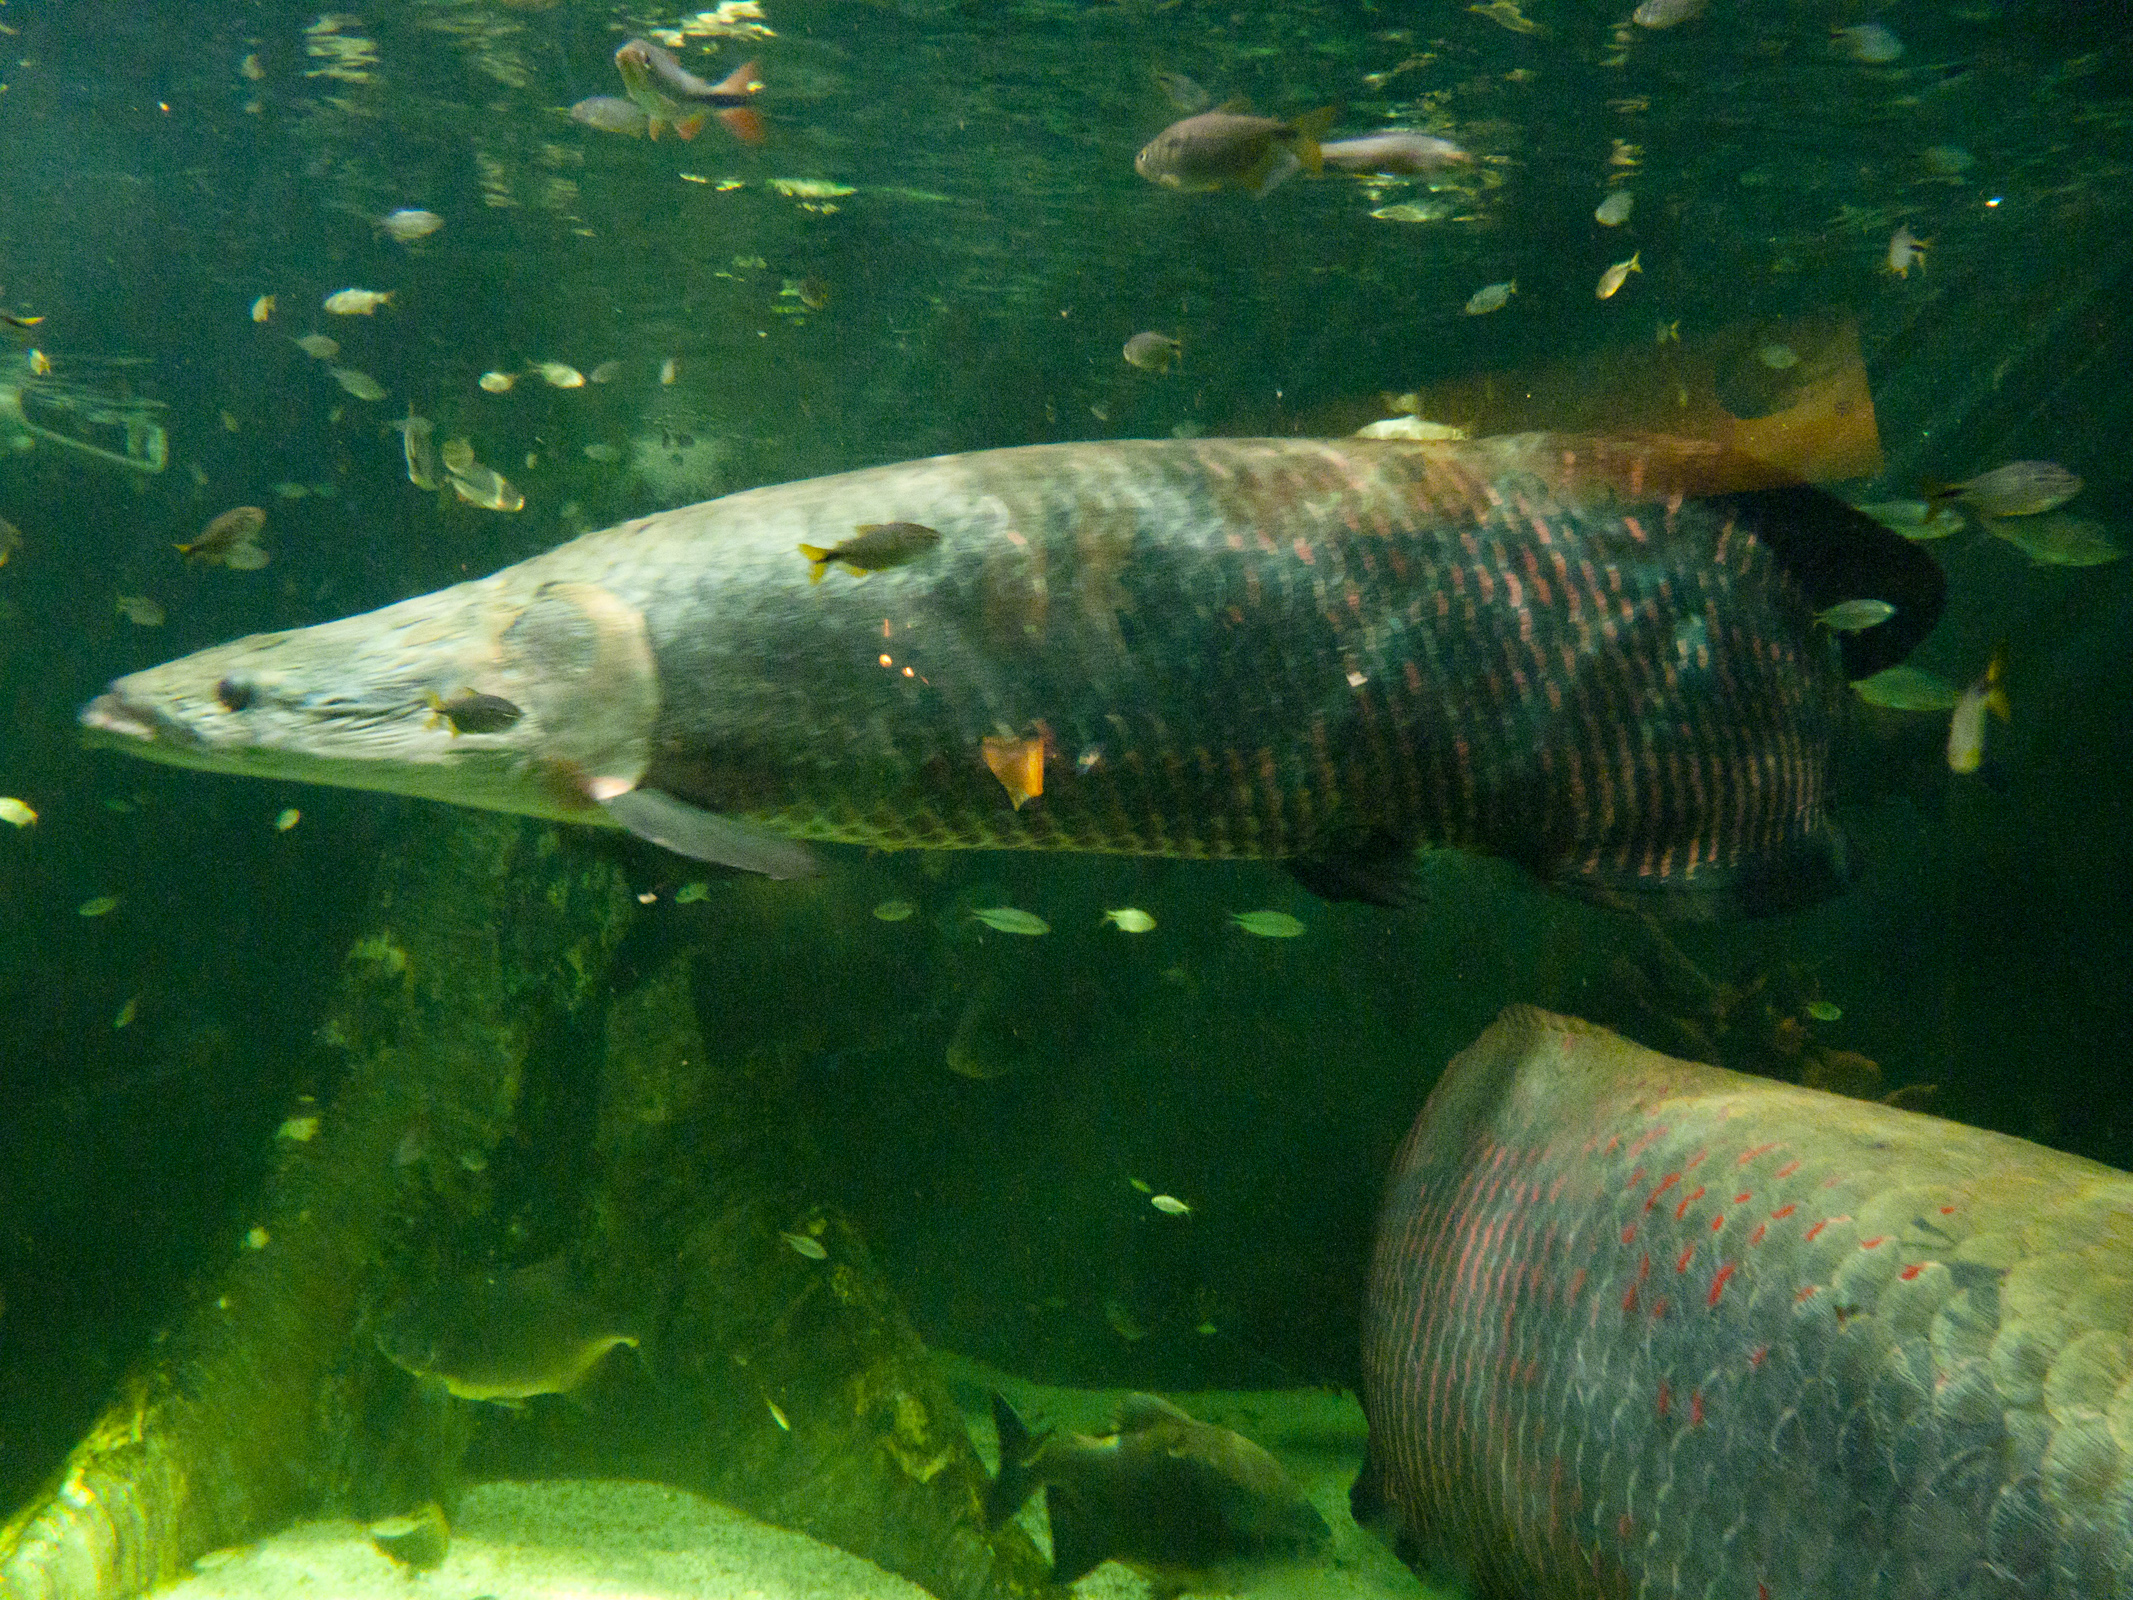 an adult fish is swimming in the large aquarium